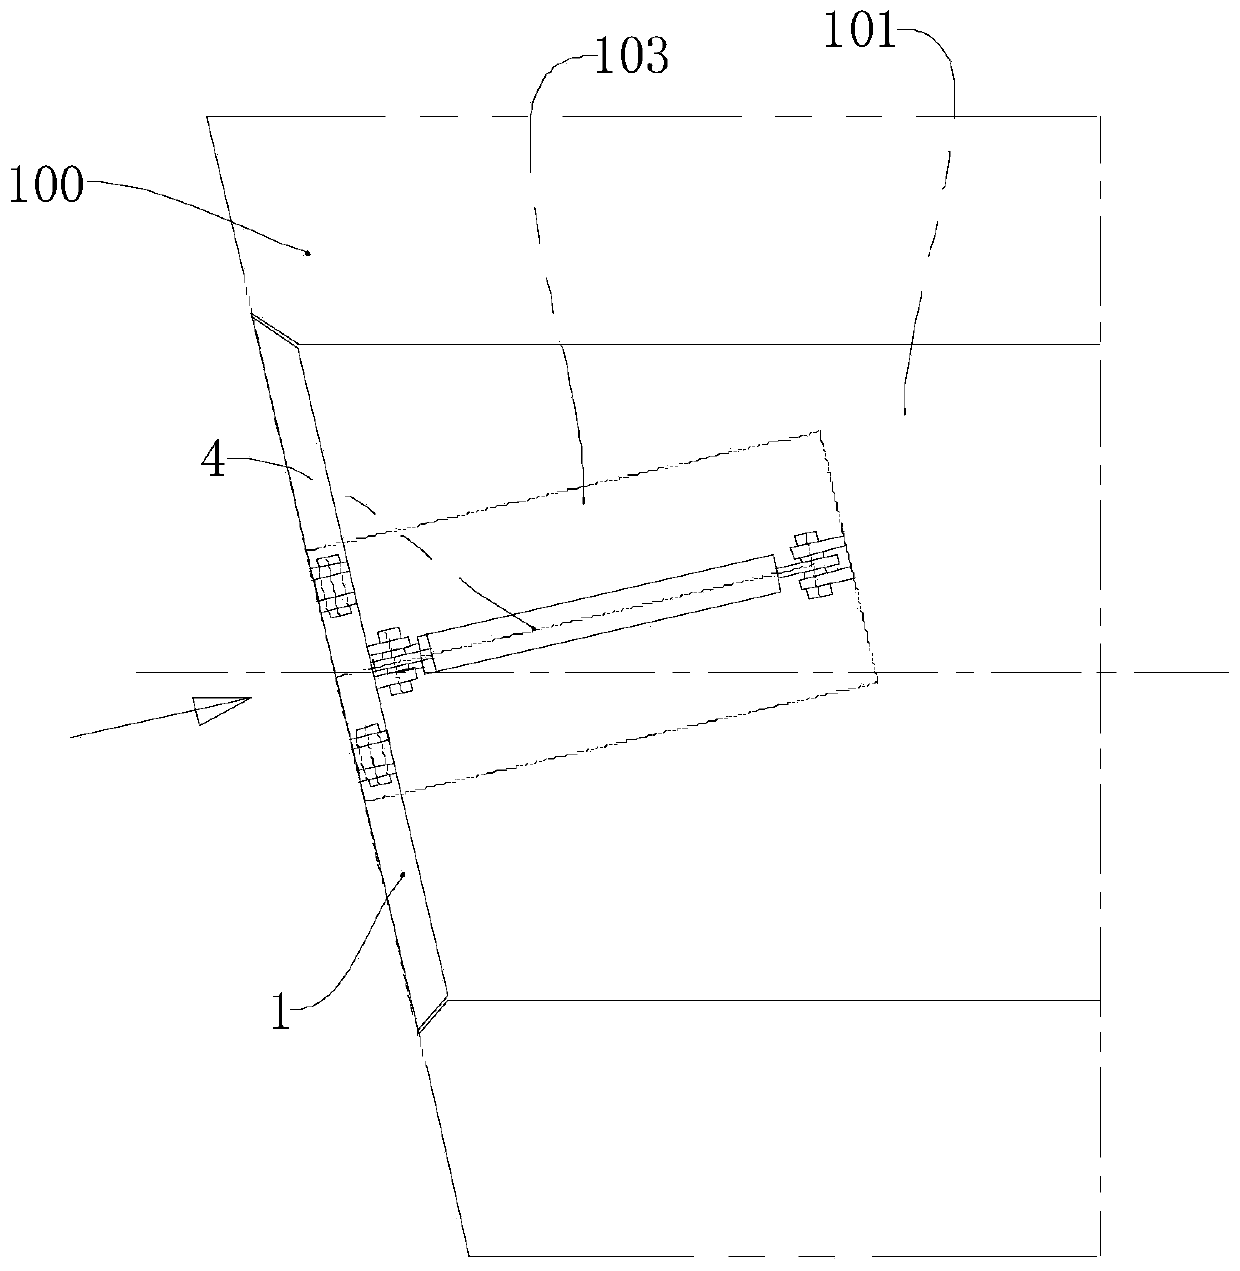 Cover plate structure for ship side-pushing outer plate opening